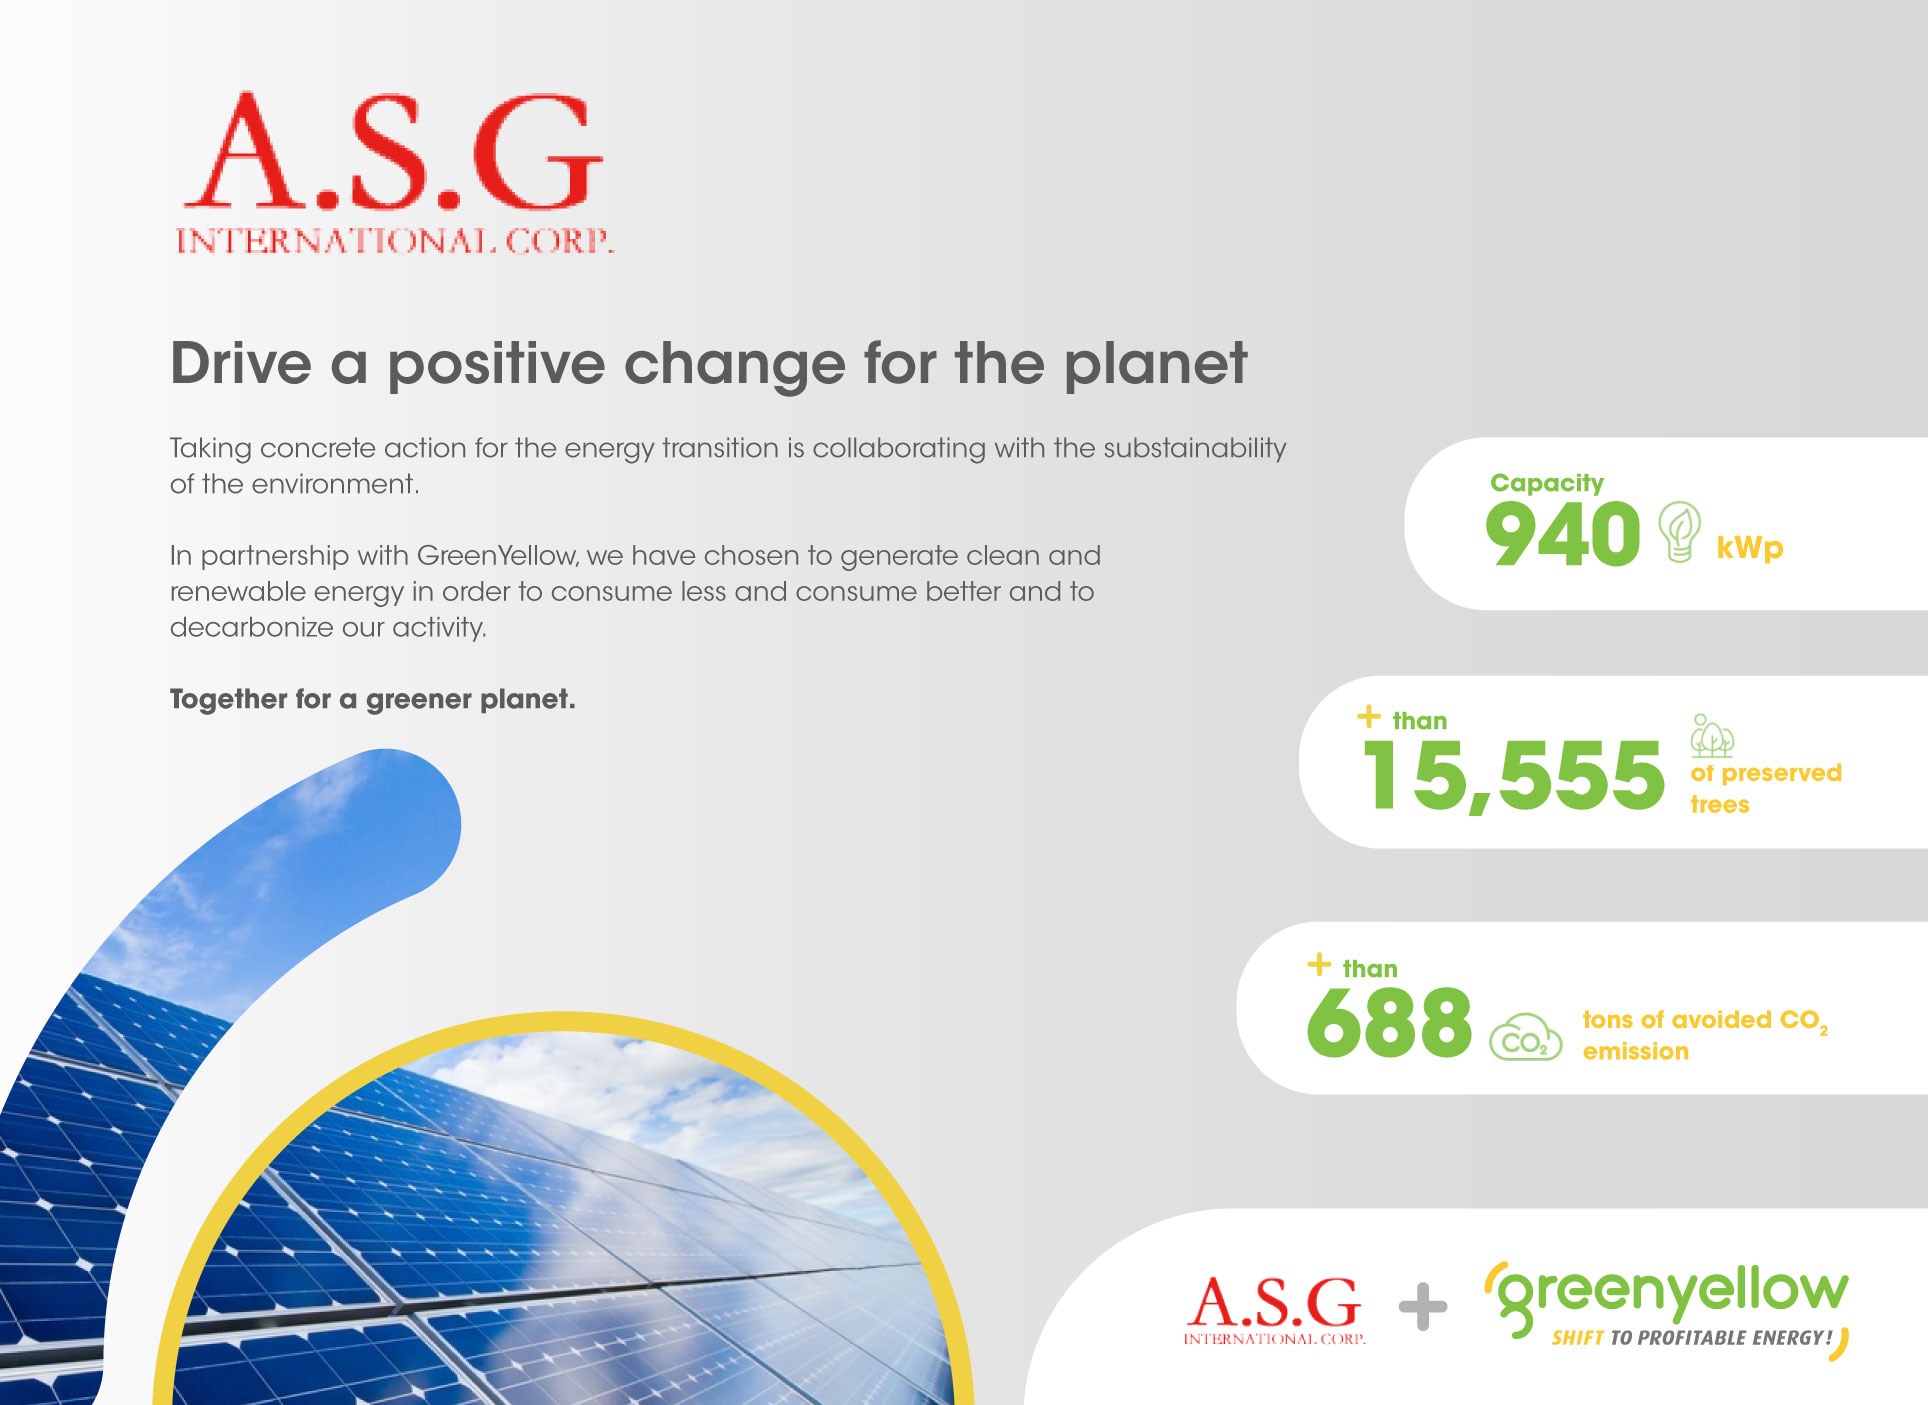 GreenYellow Vietnam signed a Solar PPA with A.S.G International Corp